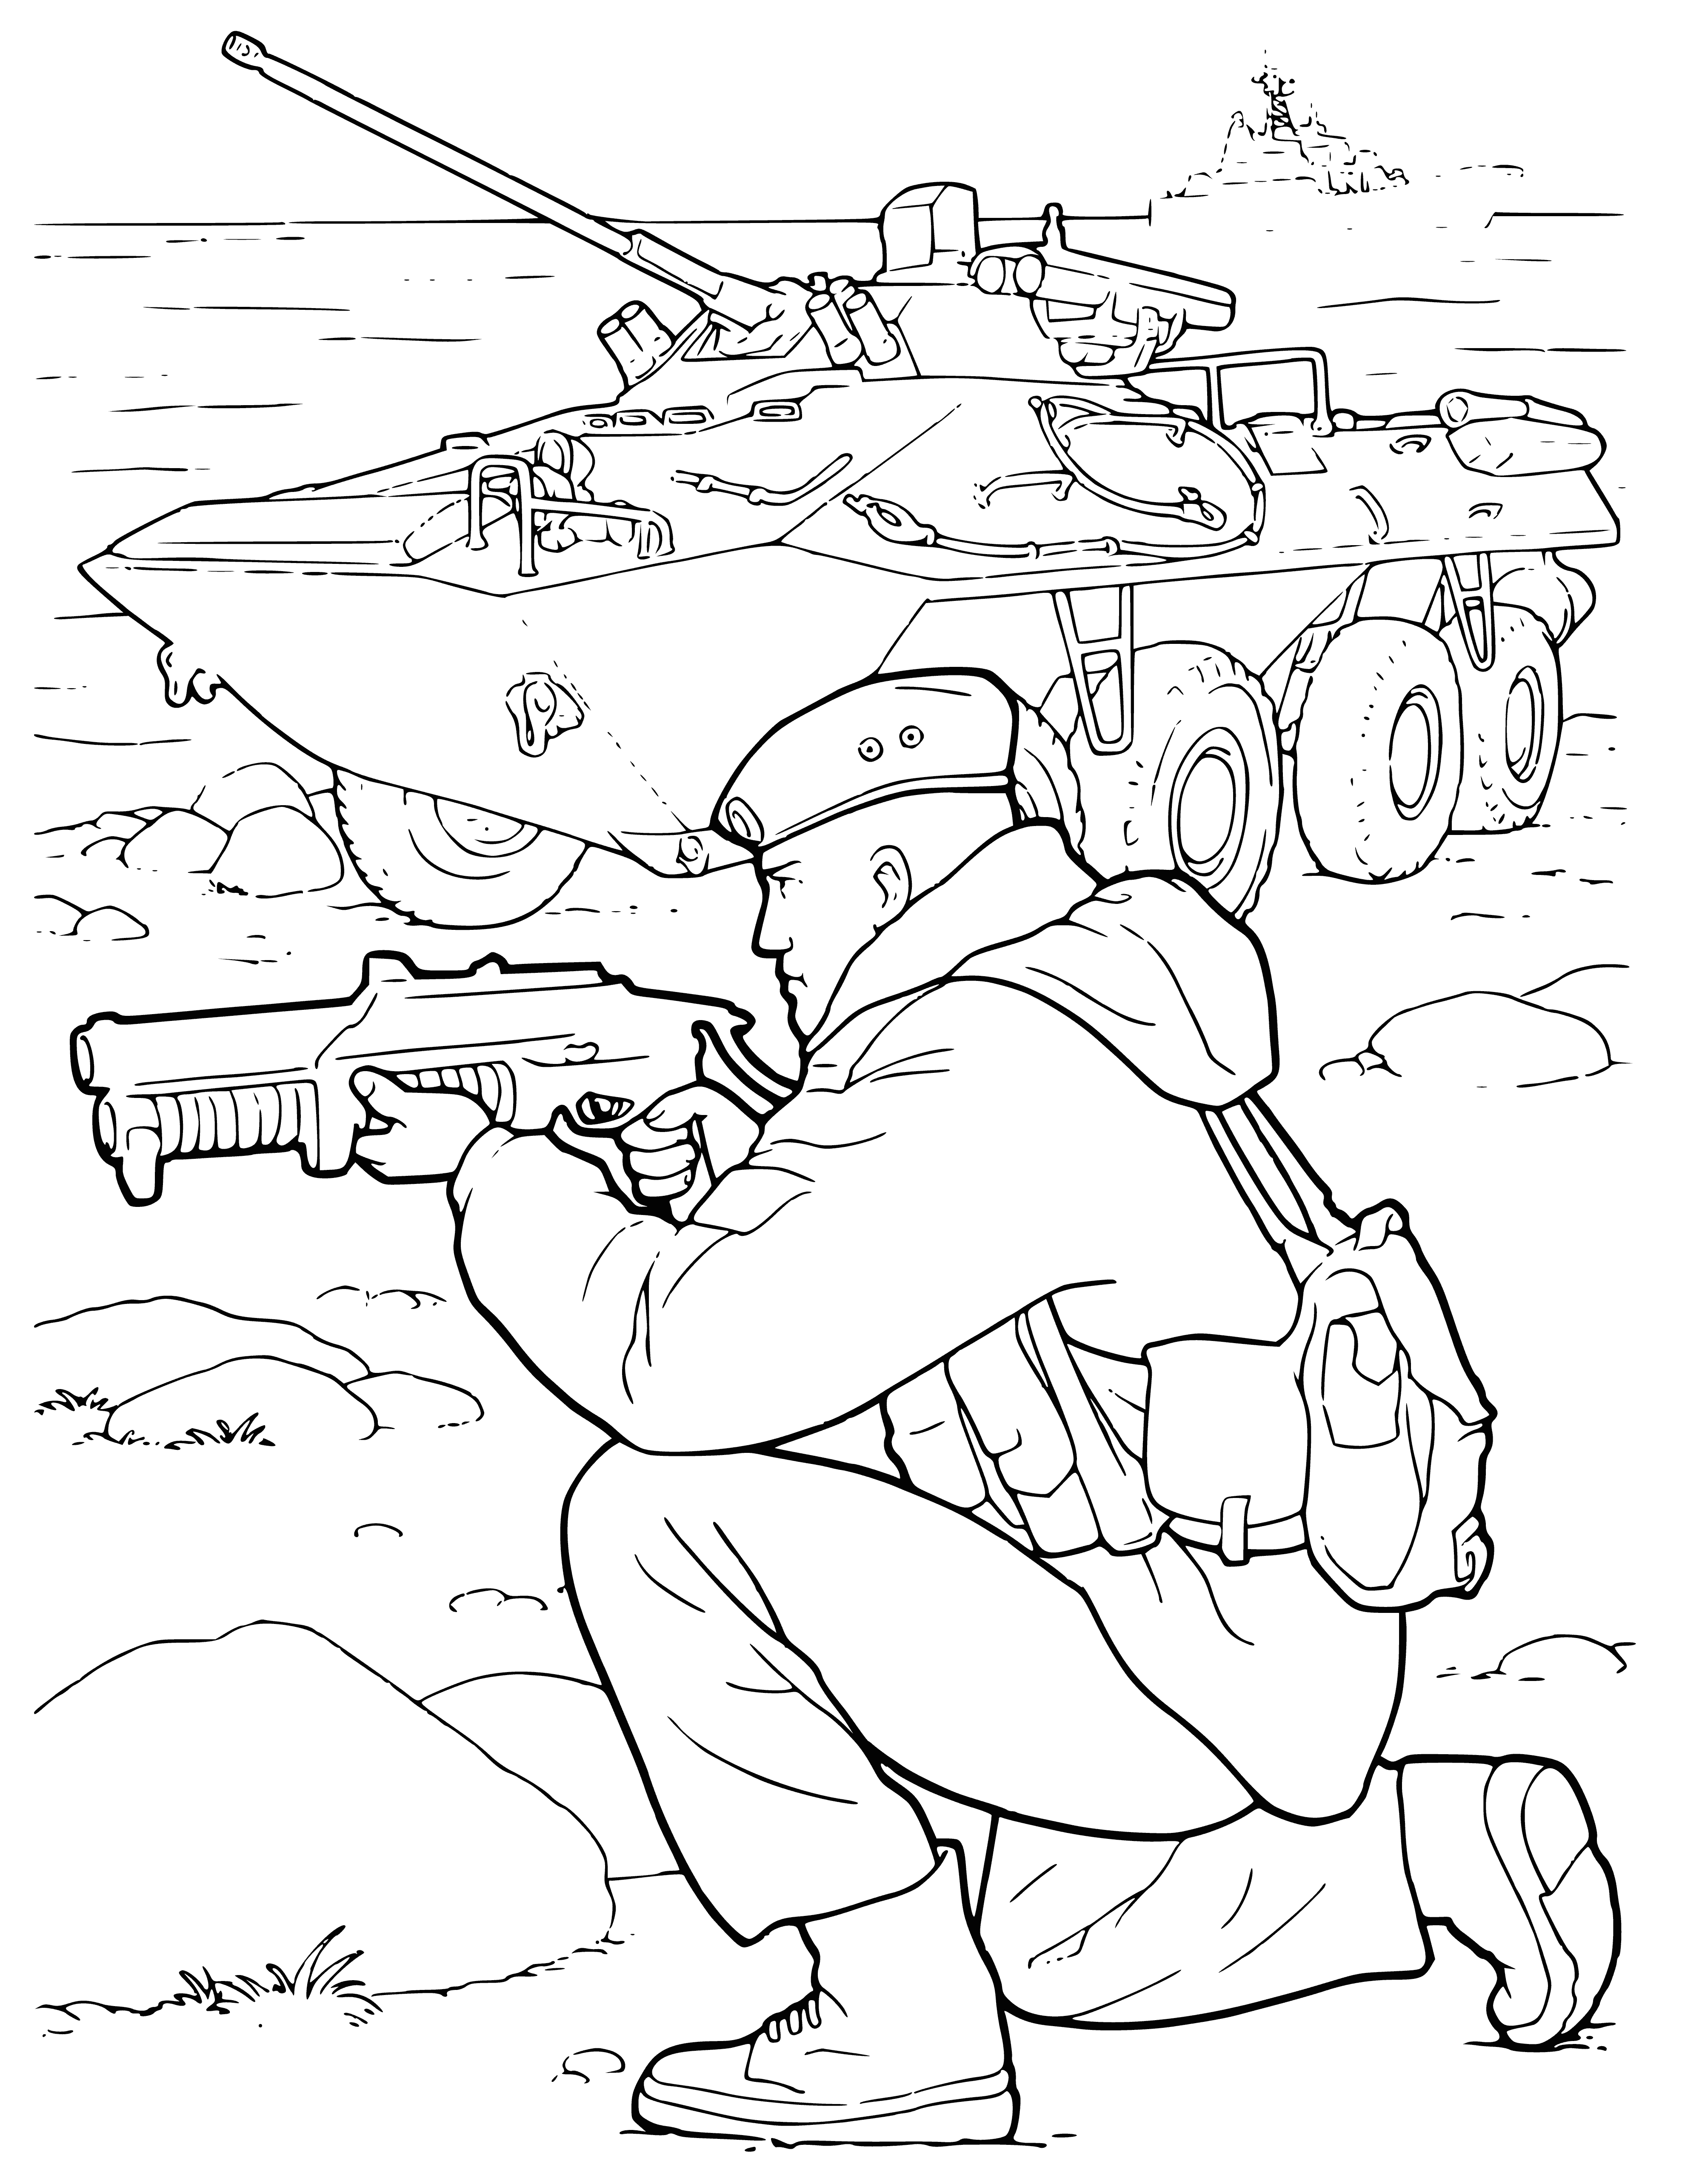 Marine corps soldier coloring page